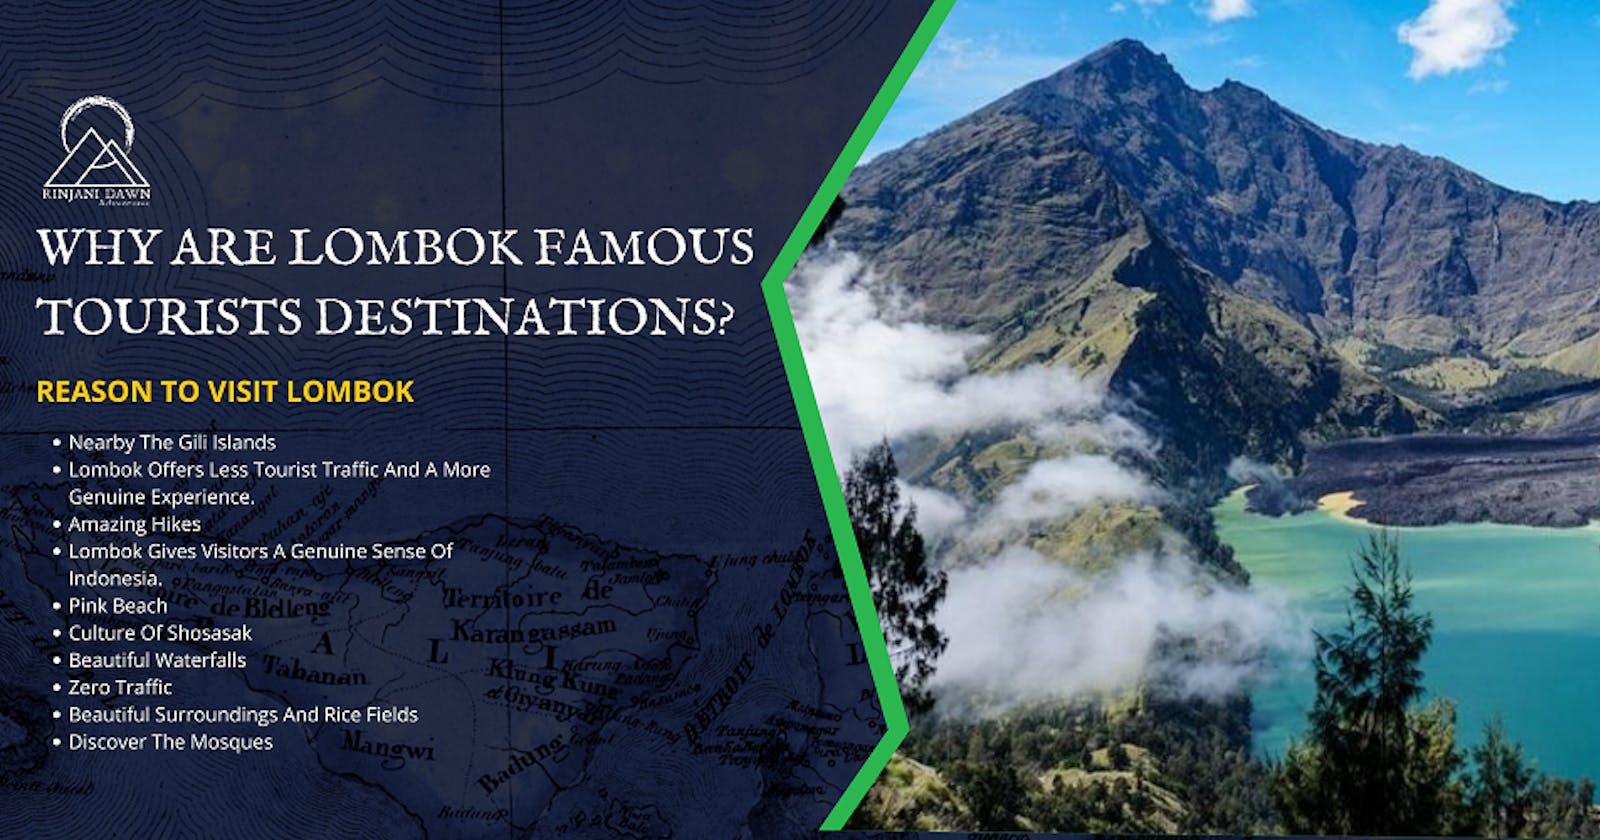 Why Are Lombok Famous Tourists Destinations?